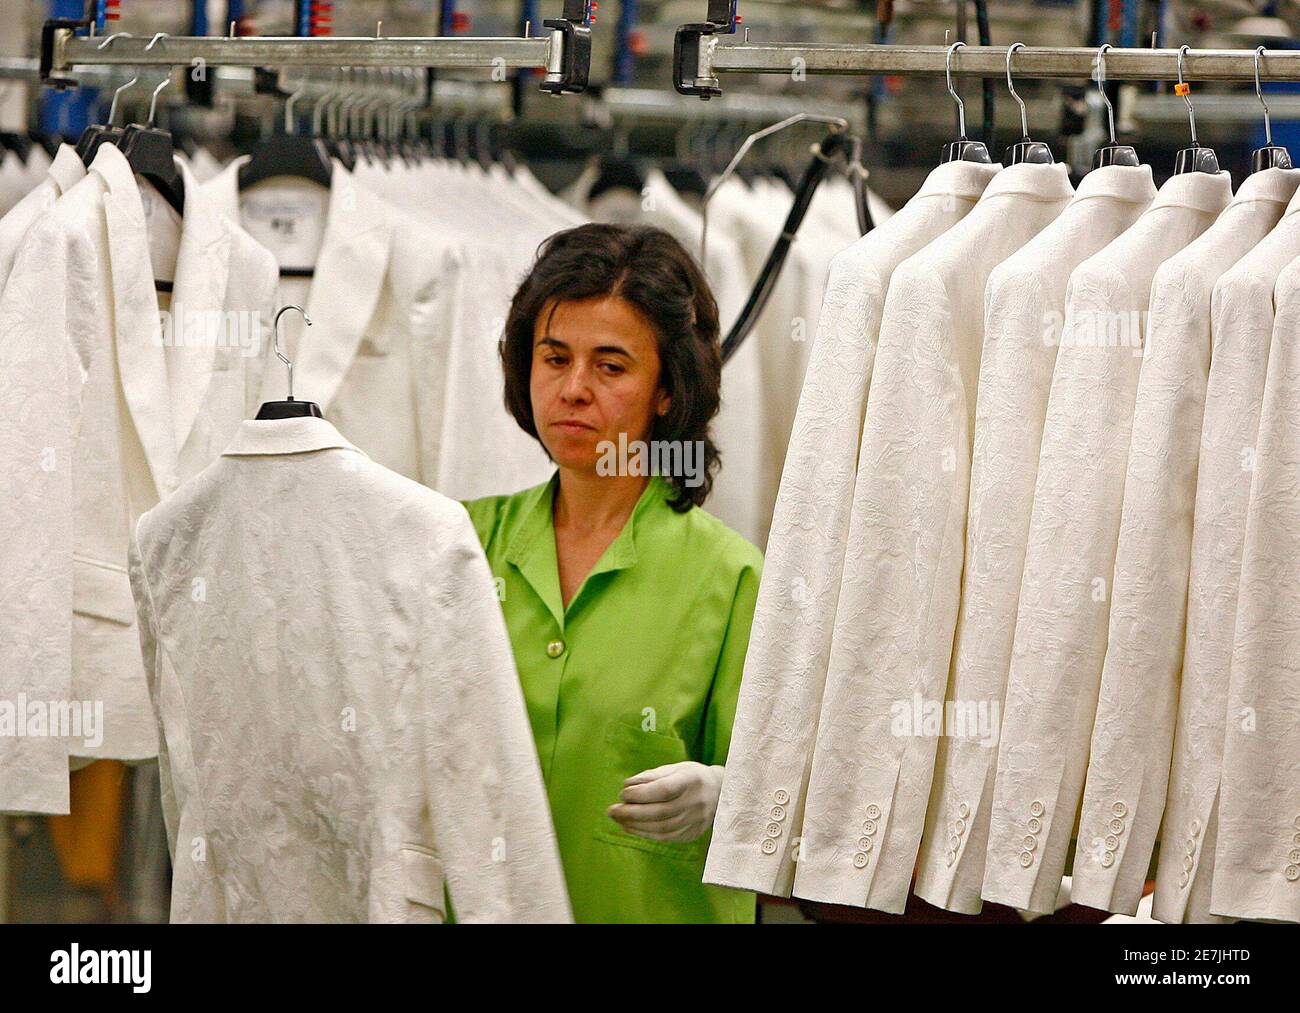 A woman works at the Zara factory at the headquarters of Inditex group in  Arteixo, northern Spain 29 March 2006. Spain's Inditex, owner of the Zara  fashion chain, [said on Wednesday it